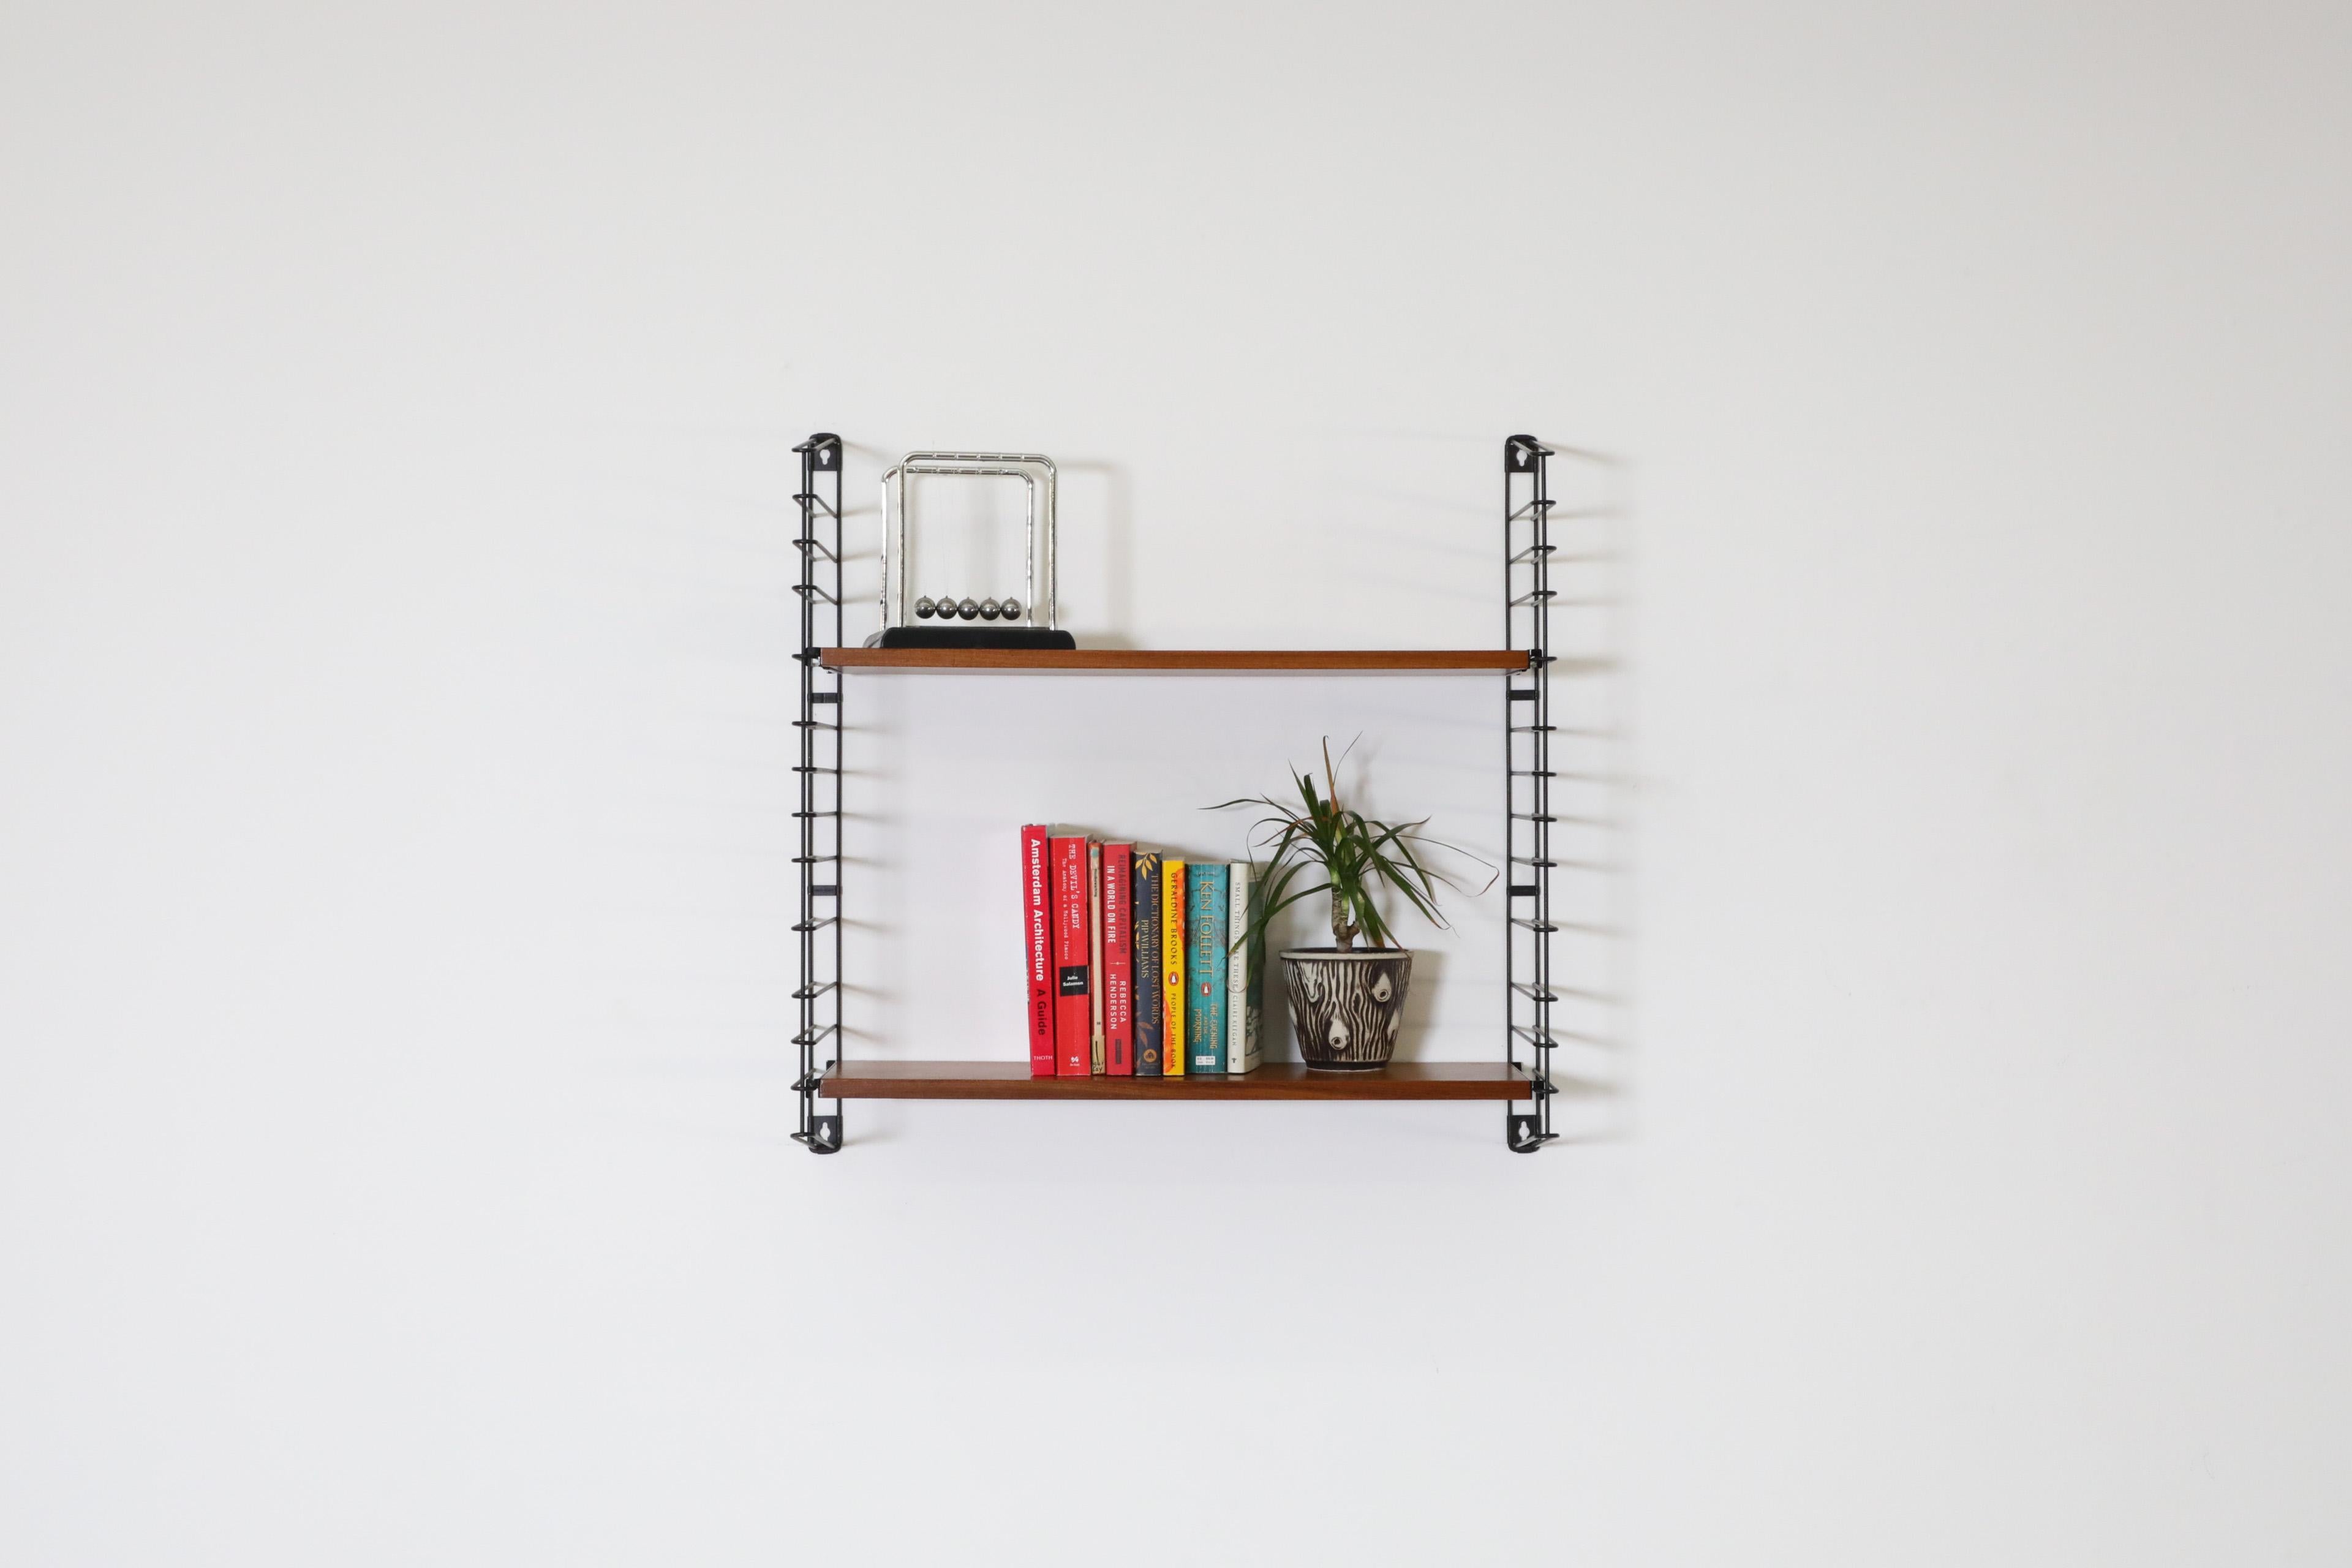 Dutch Mid-Century, single section, TOMADO shelving unit with adjustable teak shelves and black enameled metal risers. Functional and attractive wall mount shelves perfect for displaying books, plants and other accessories. In original condition with